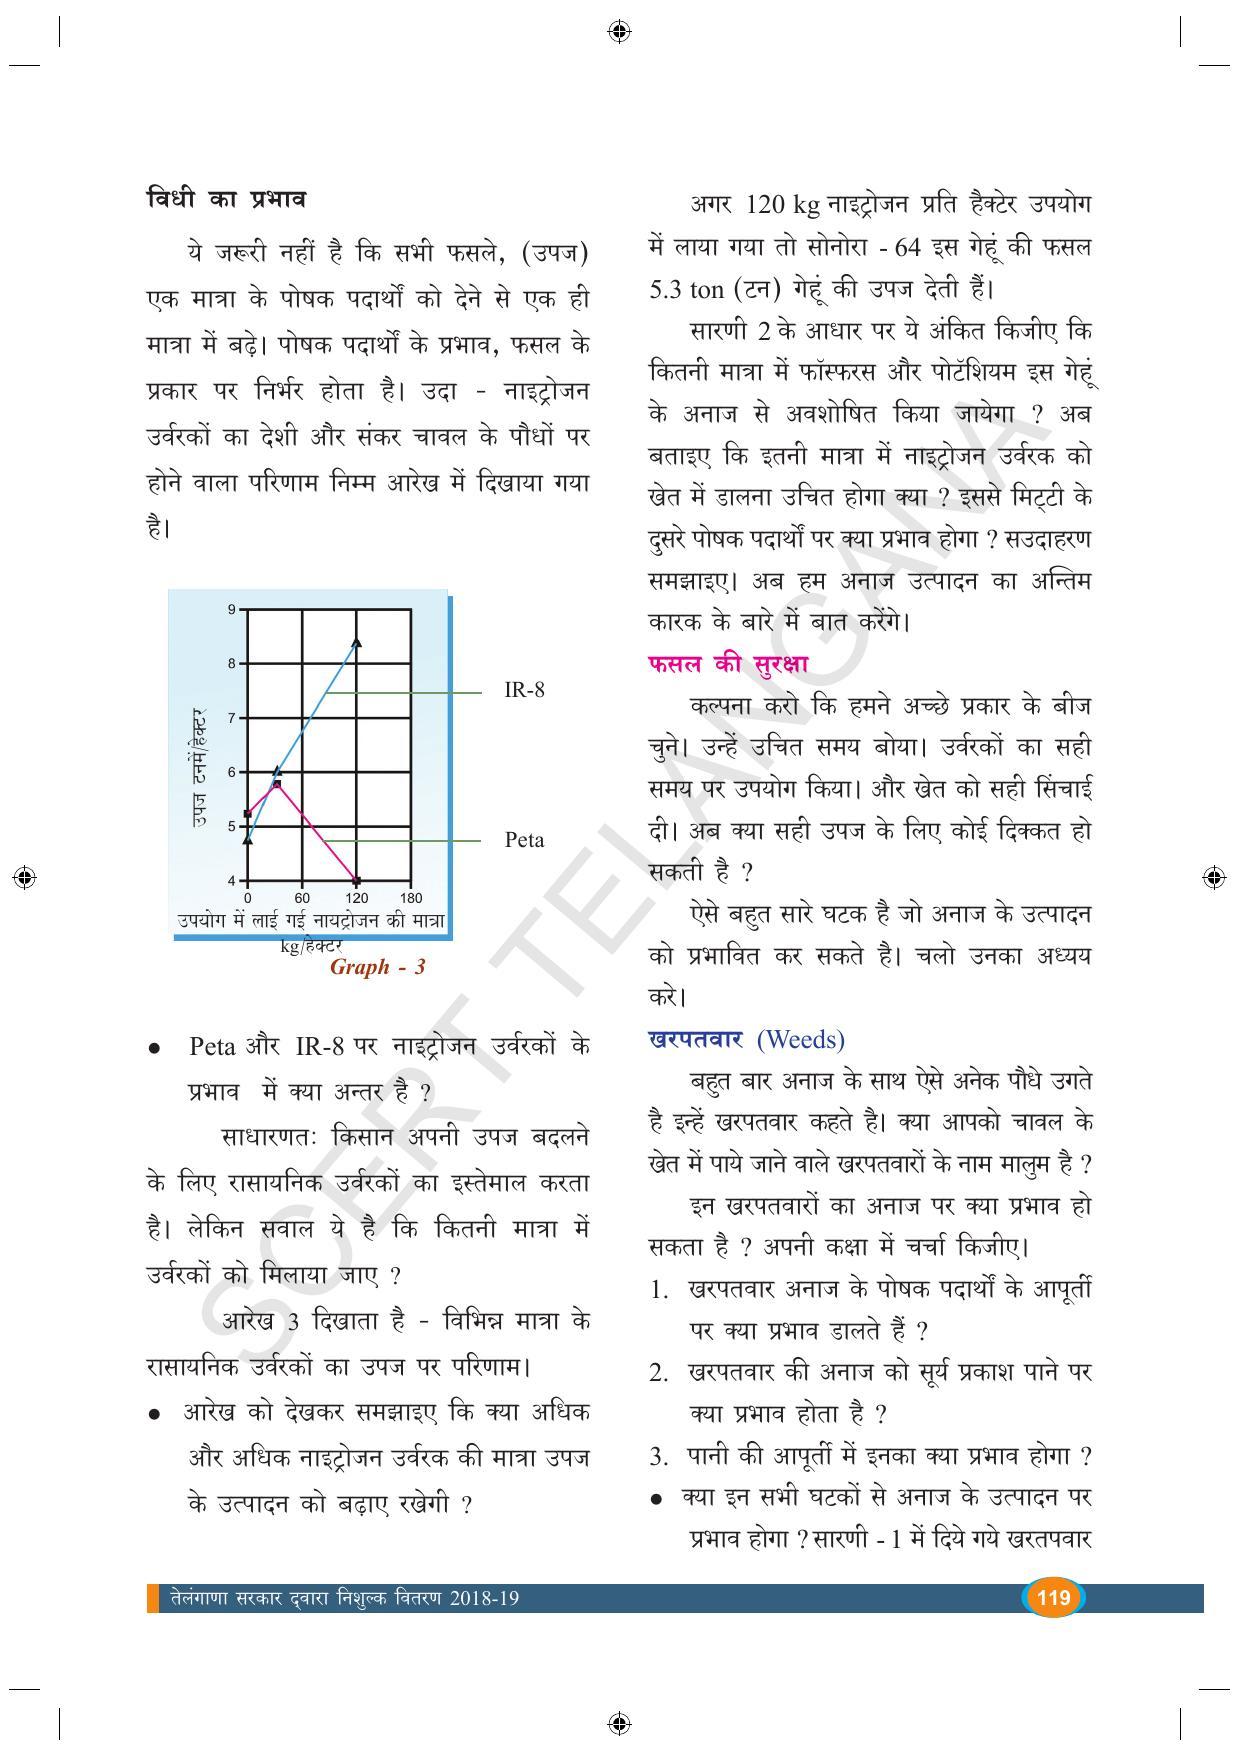 TS SCERT Class 9 Biological Science (Hindi Medium) Text Book - Page 131